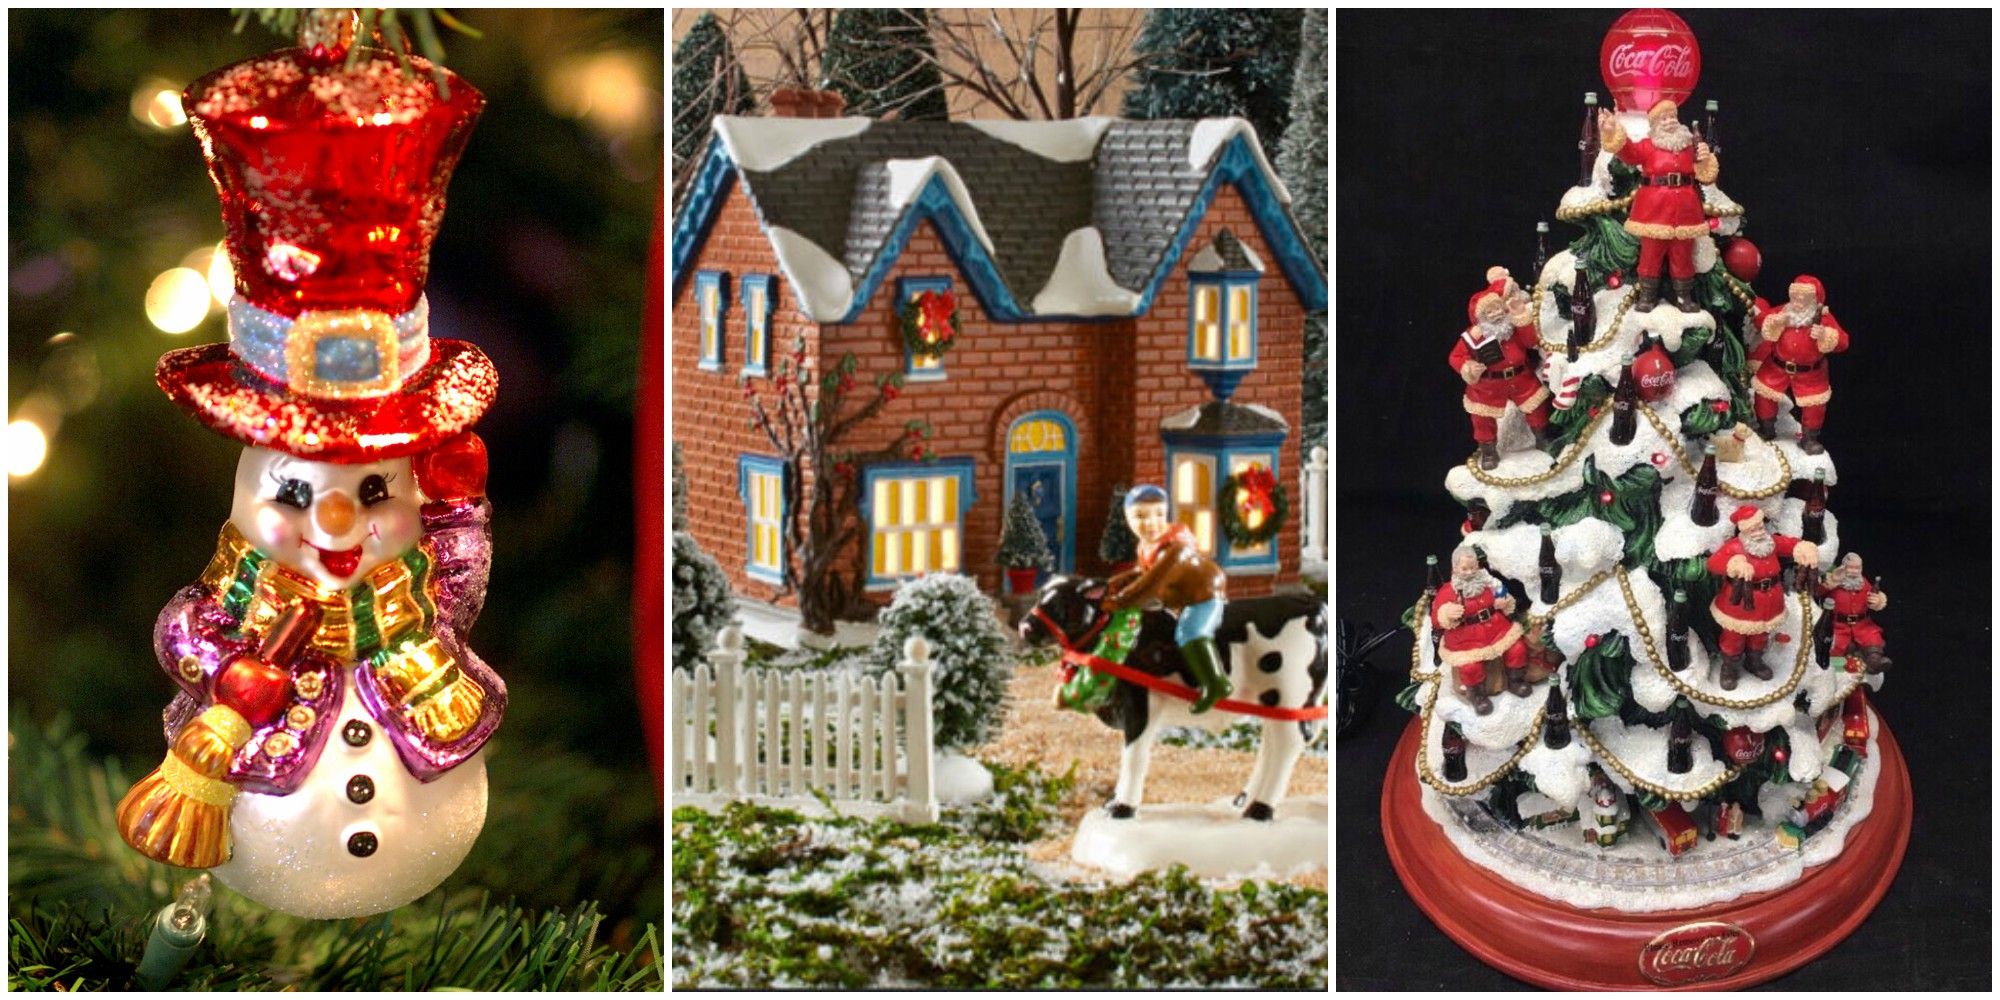 Vintage Christmas Collectibles on eBay - Selling Christmas ...